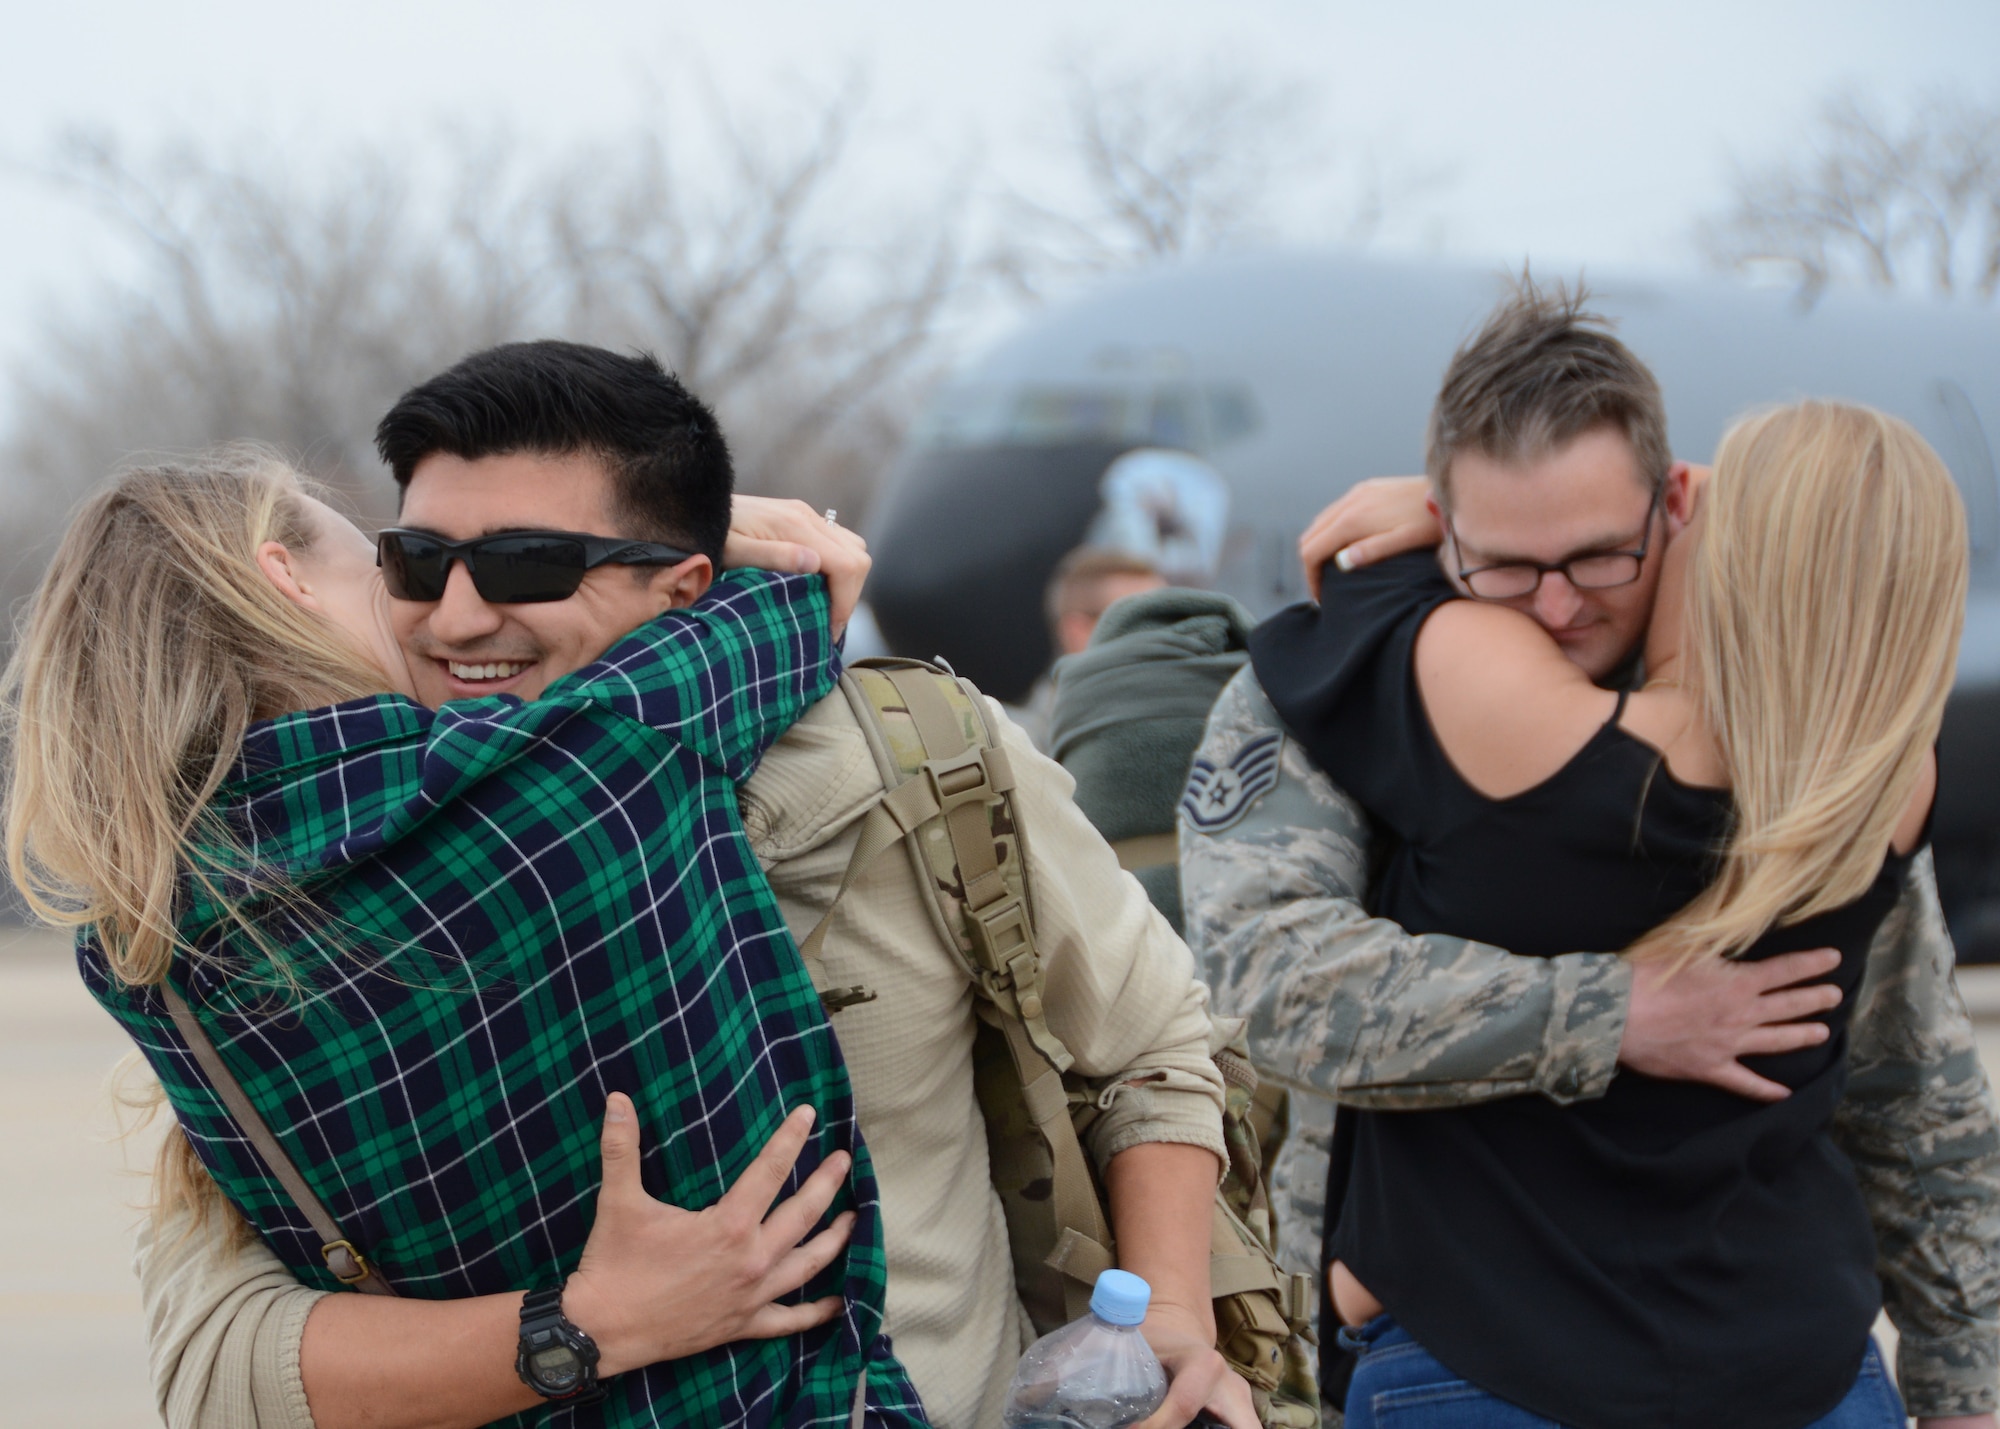 Staff Sgt. Adrian Condit of the 507th Aircraft Maintenance Squadron and Staff Sgt. Mykal Short of the 507th Maintenance Squadron embrace their family members following a deployment Feb. 19, 2017, at Tinker Air Force Base, Okla. More than 90 Reservists deployed in December 2016 in support of air operations at Incirlik Air Base, Turkey, against the Islamic State group. (U.S. Air Force photo/Tech. Sgt. Lauren Gleason)